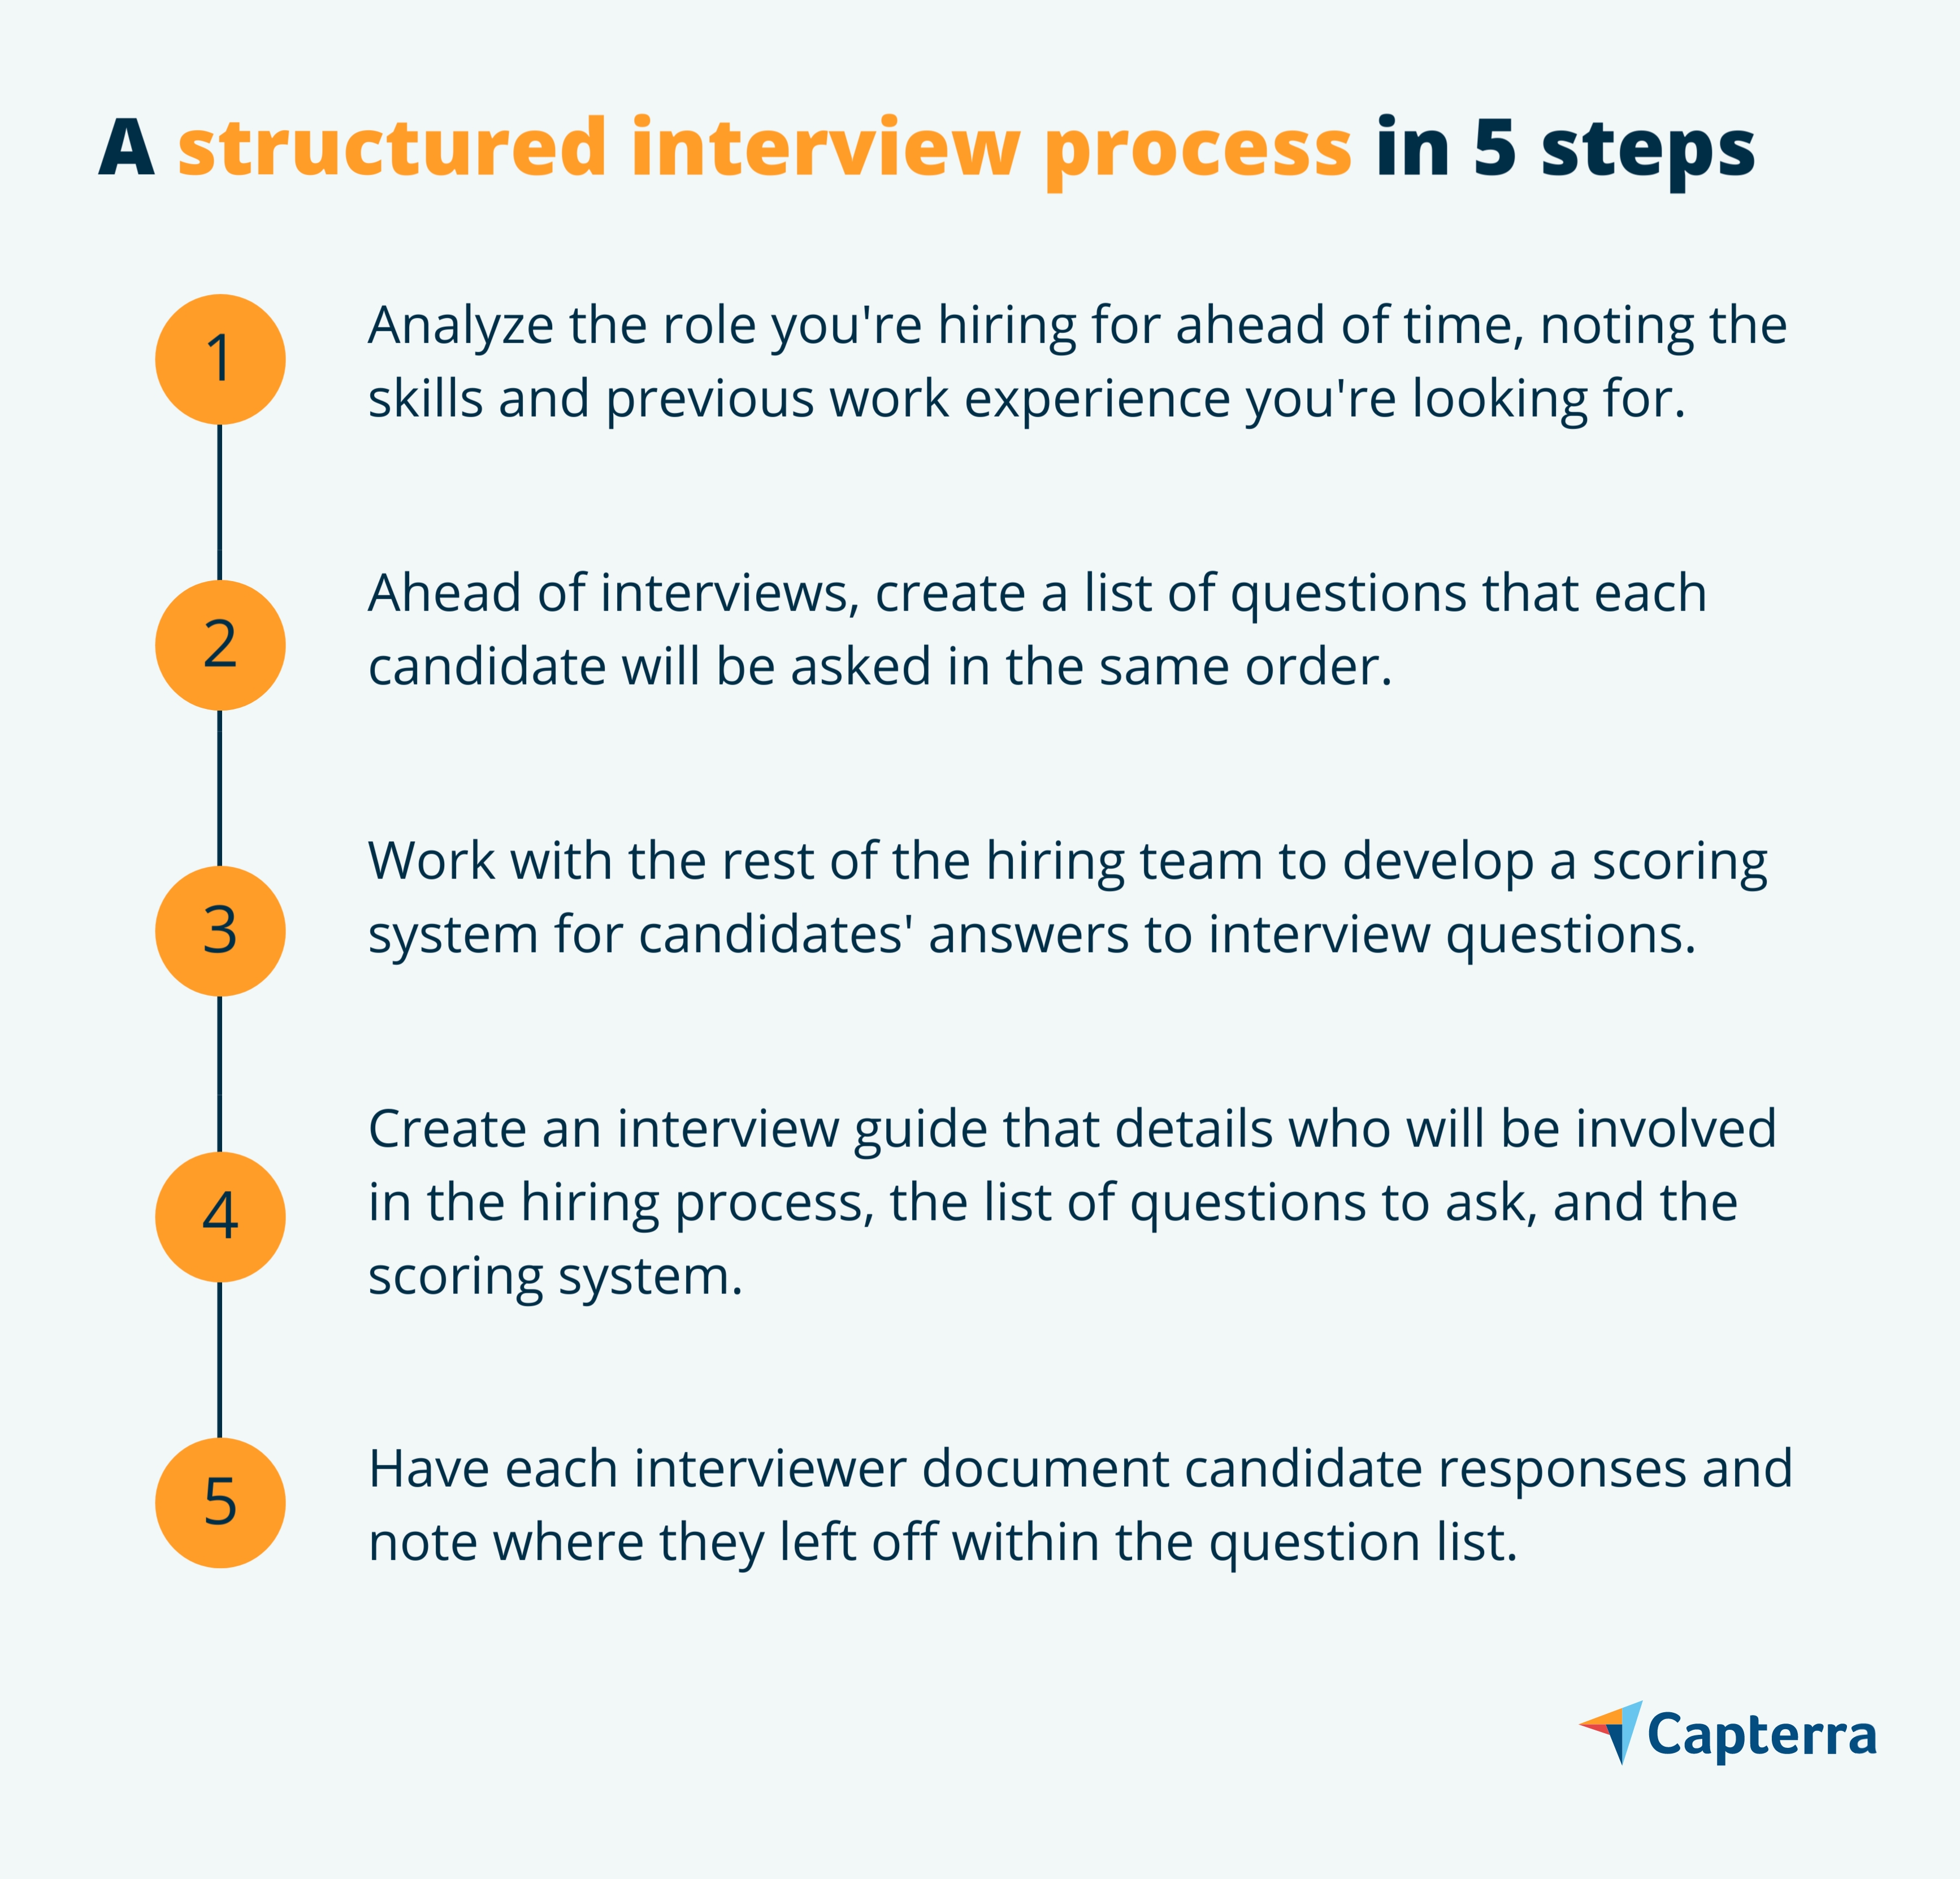 Structured interview process graphic for the blog article "A Recruiting Leader's Guide to Equitable Hiring Practices"